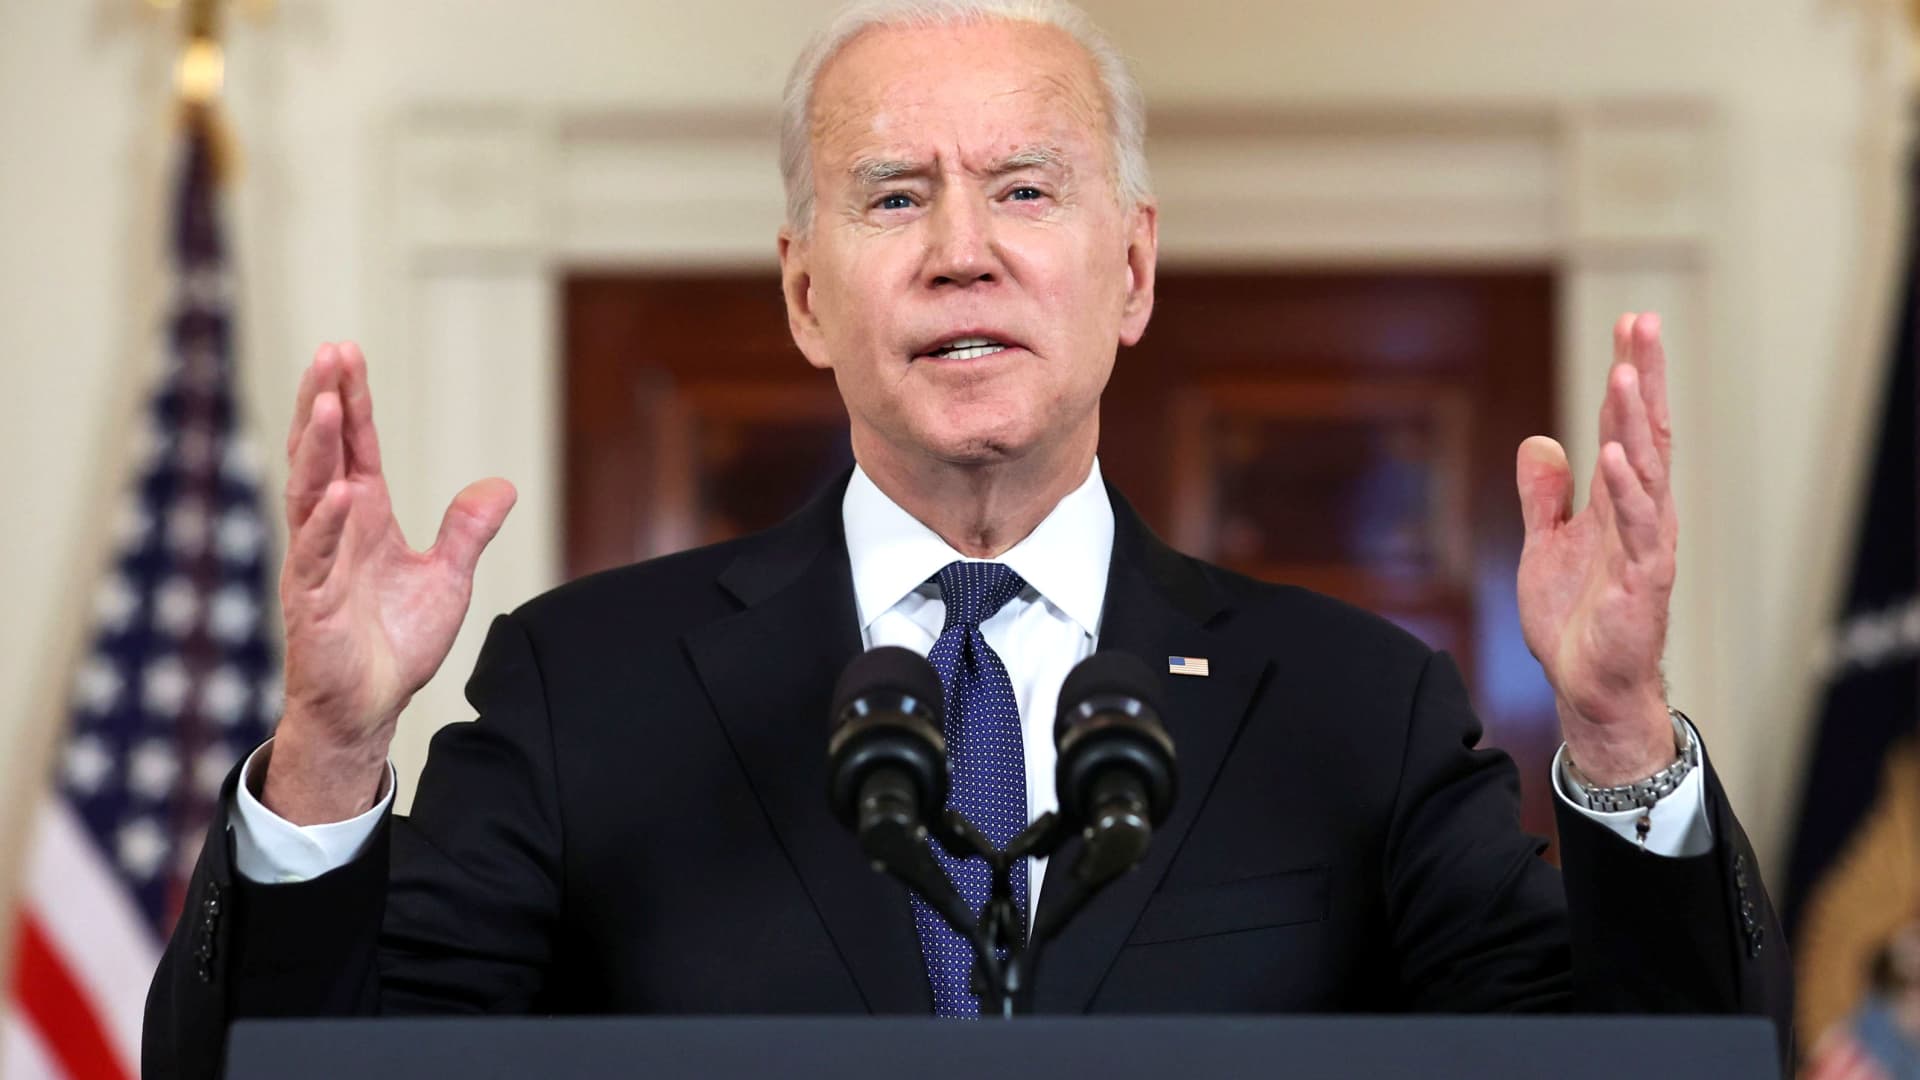 U.S. President Joe Biden delivers remarks before a ceasefire agreed by Israel and Hamas was to go into effect, during a brief appearance in the Cross Hall at the White House in Washington, May 20, 2021.